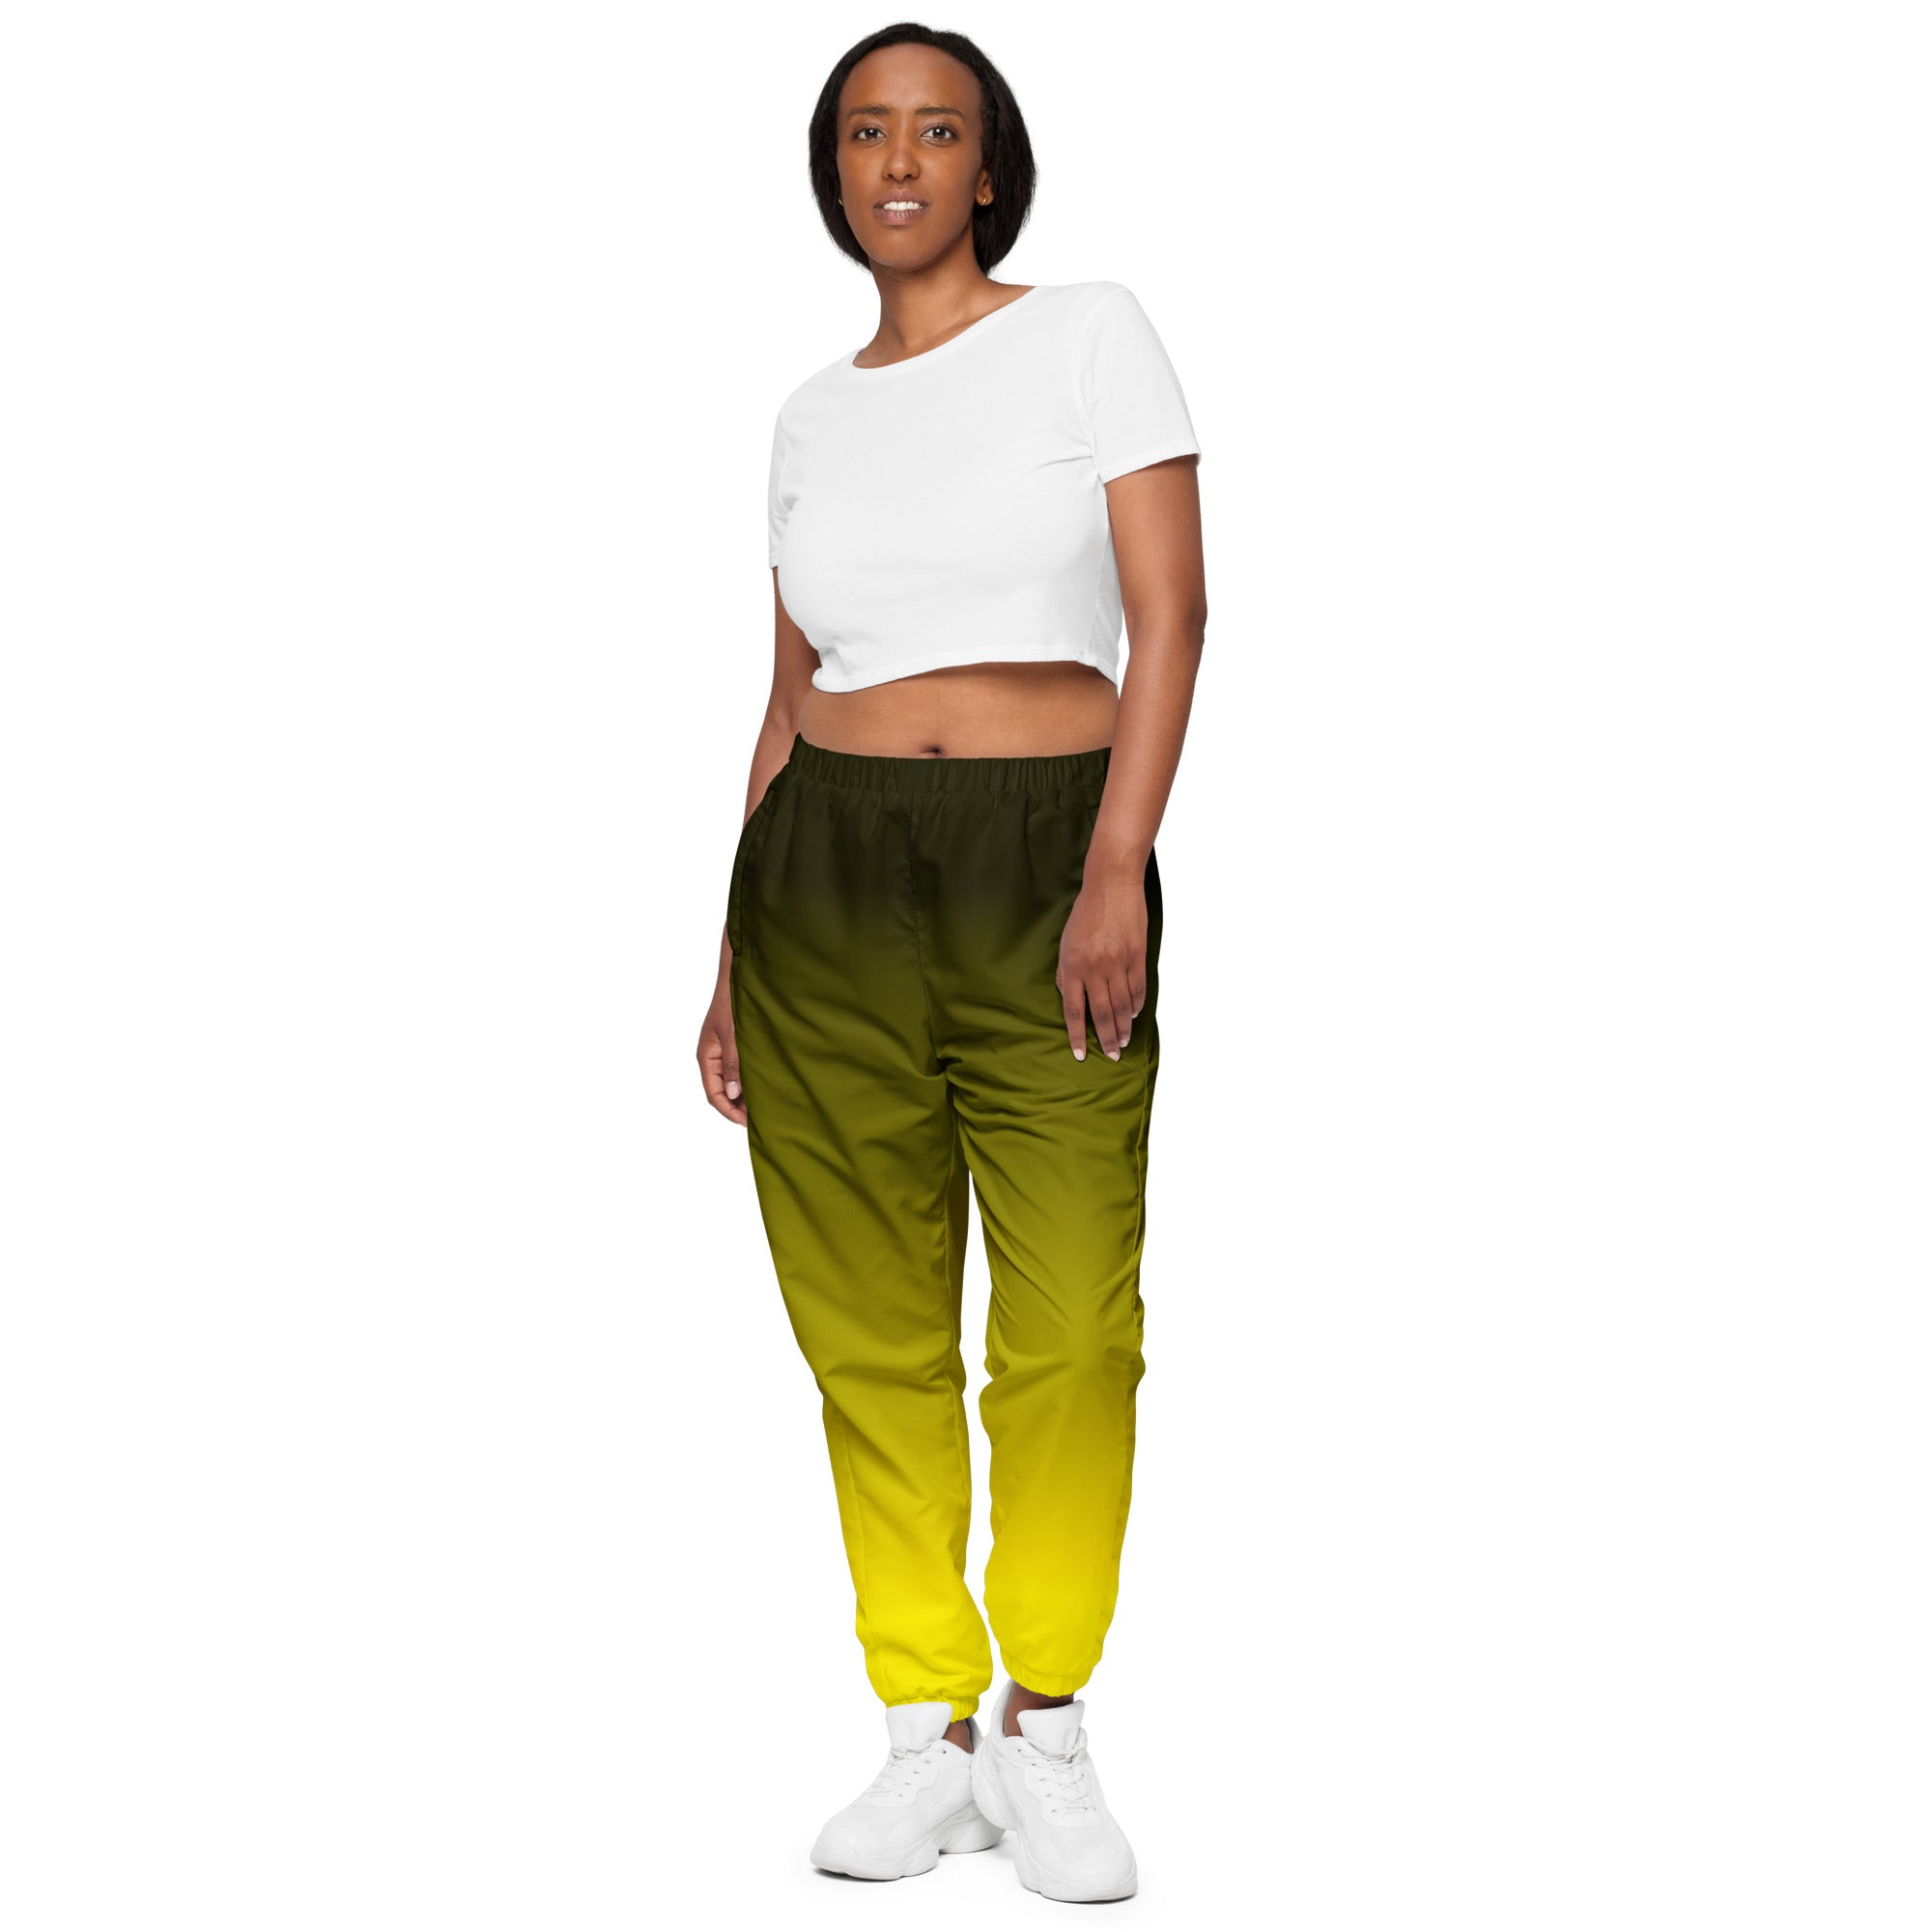 PUMA Tfs Og Track Pants 596474_51 in Latur at best price by Gayatri Sports  - Justdial